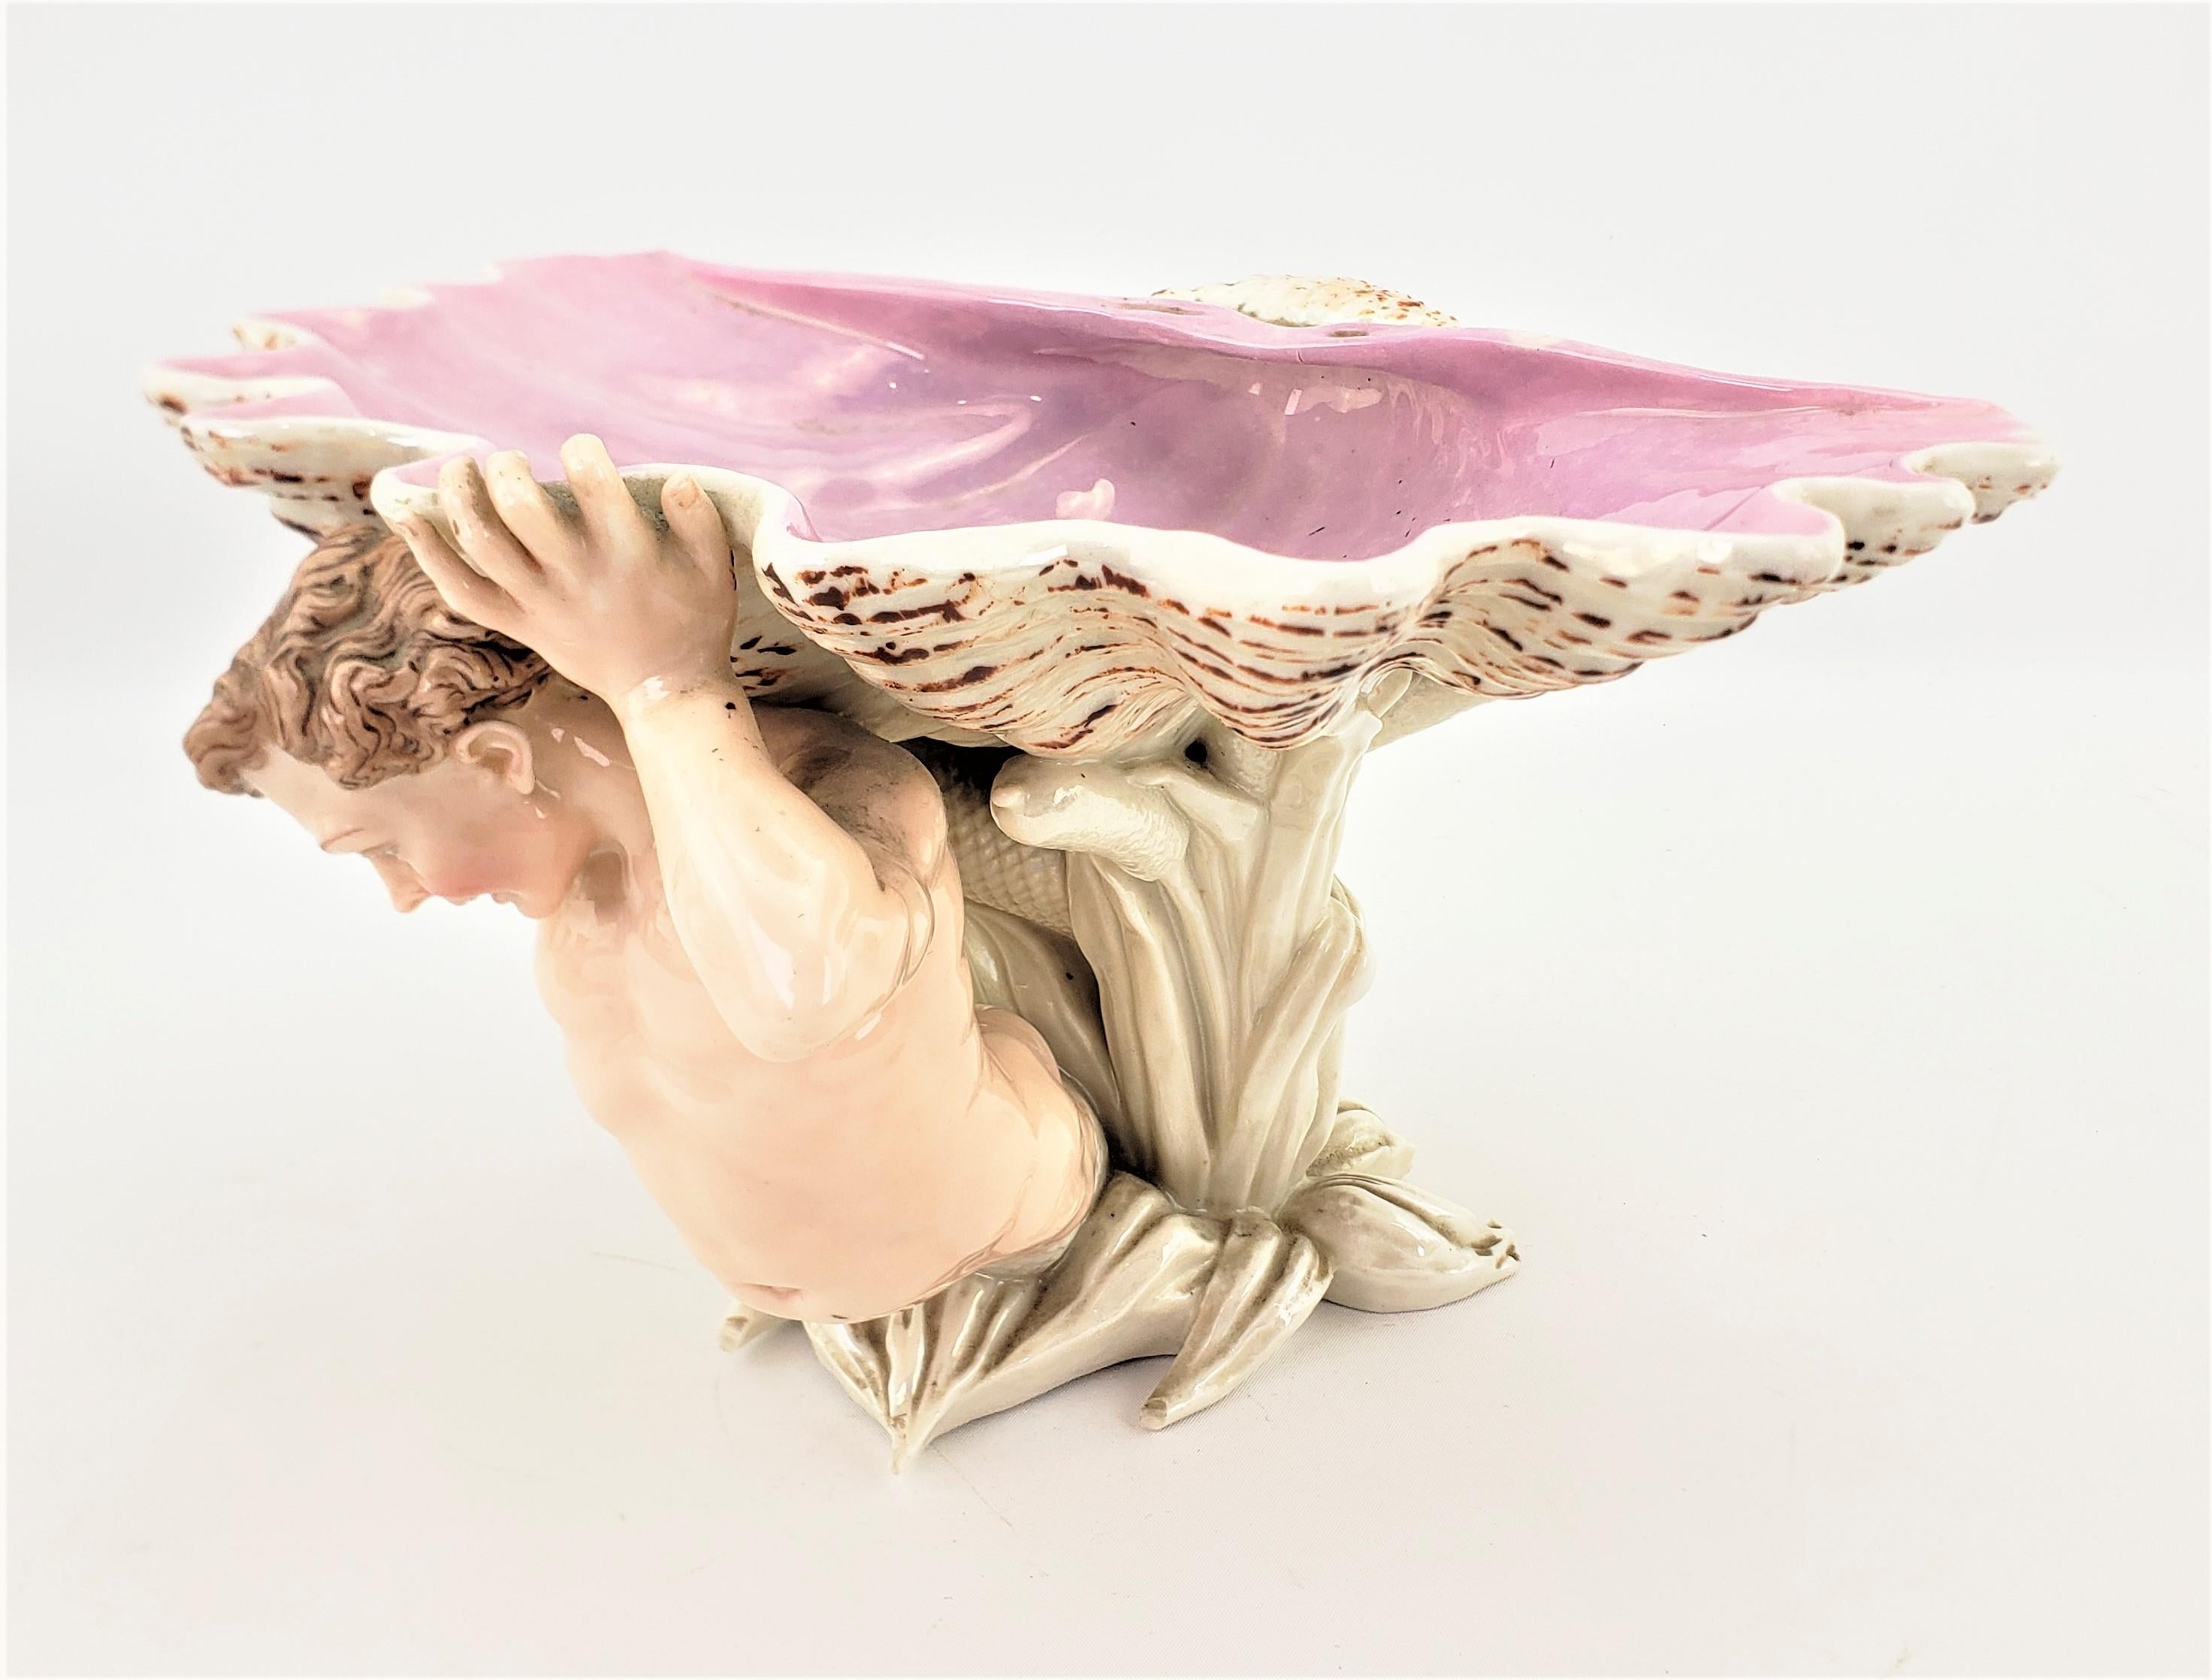 This antique hard paste porcelain bowl or centerpiece is unsigned, but presumed to have been made in German in approximately 1880 in a Neoclassical Revival style. The bowl features a young male mermaid styled figure holding a large shell with a